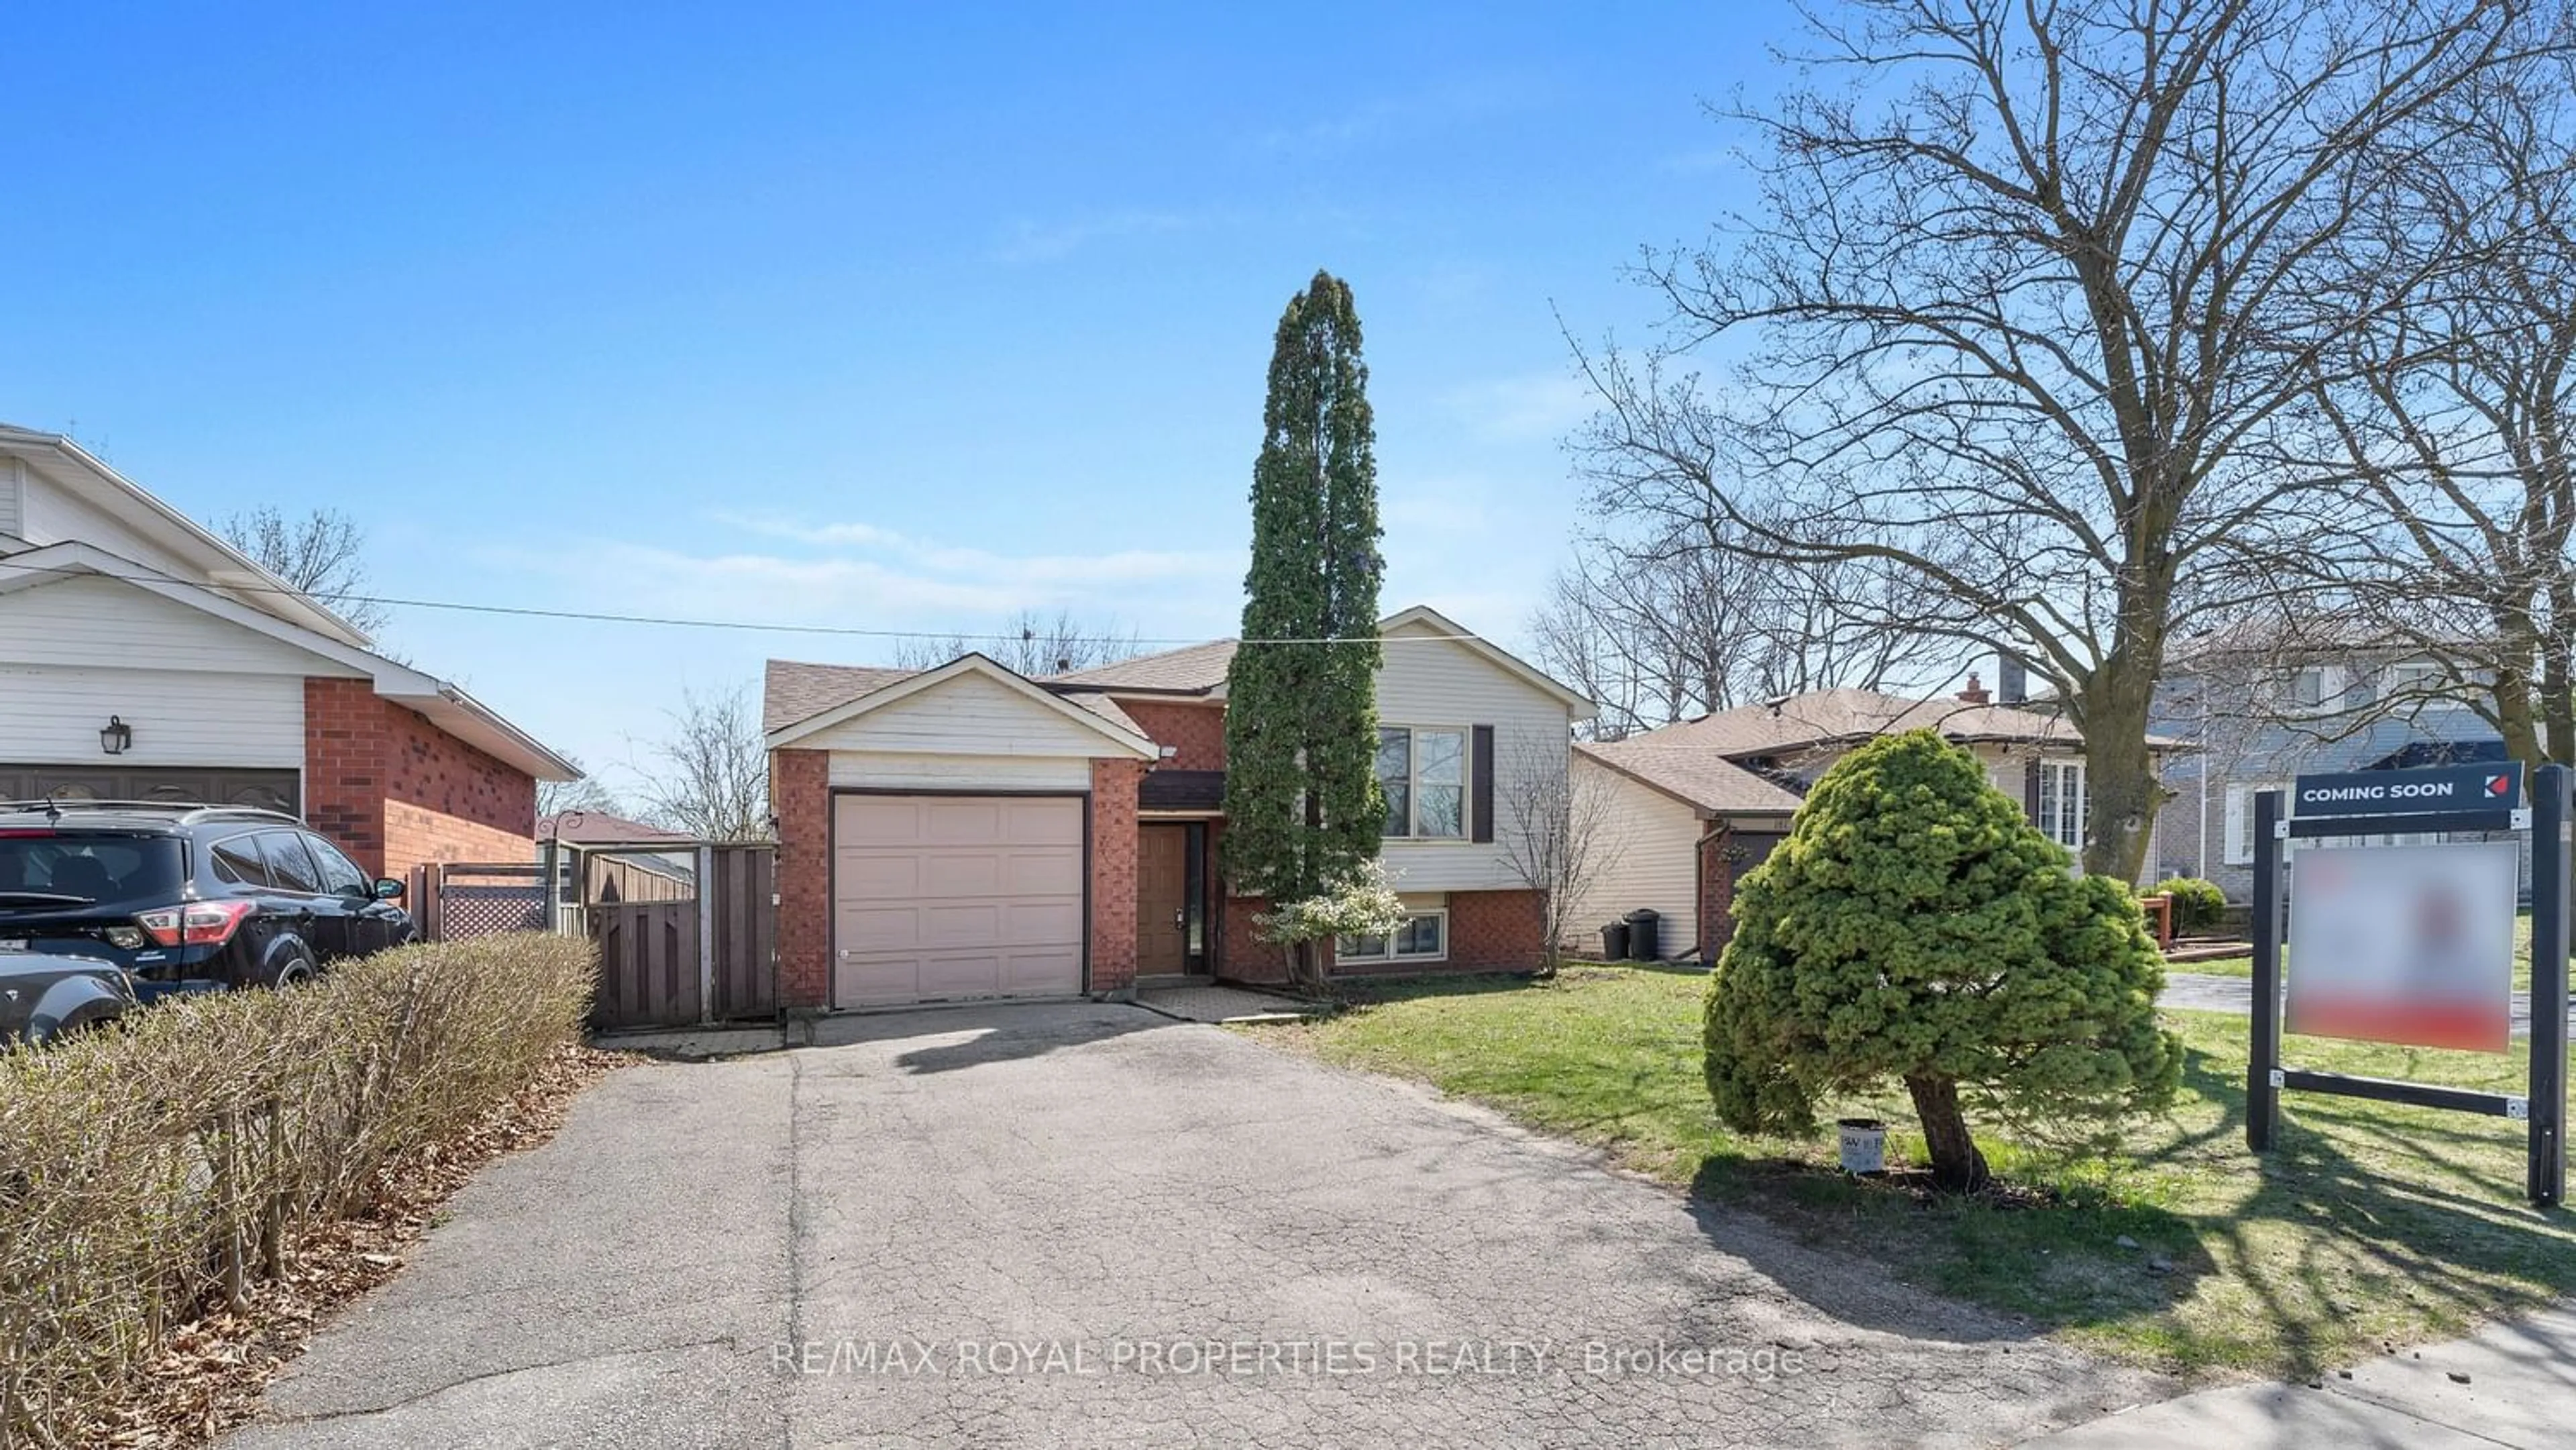 Frontside or backside of a home for 157 Iroquois Ave, Oshawa Ontario L1G 7P5